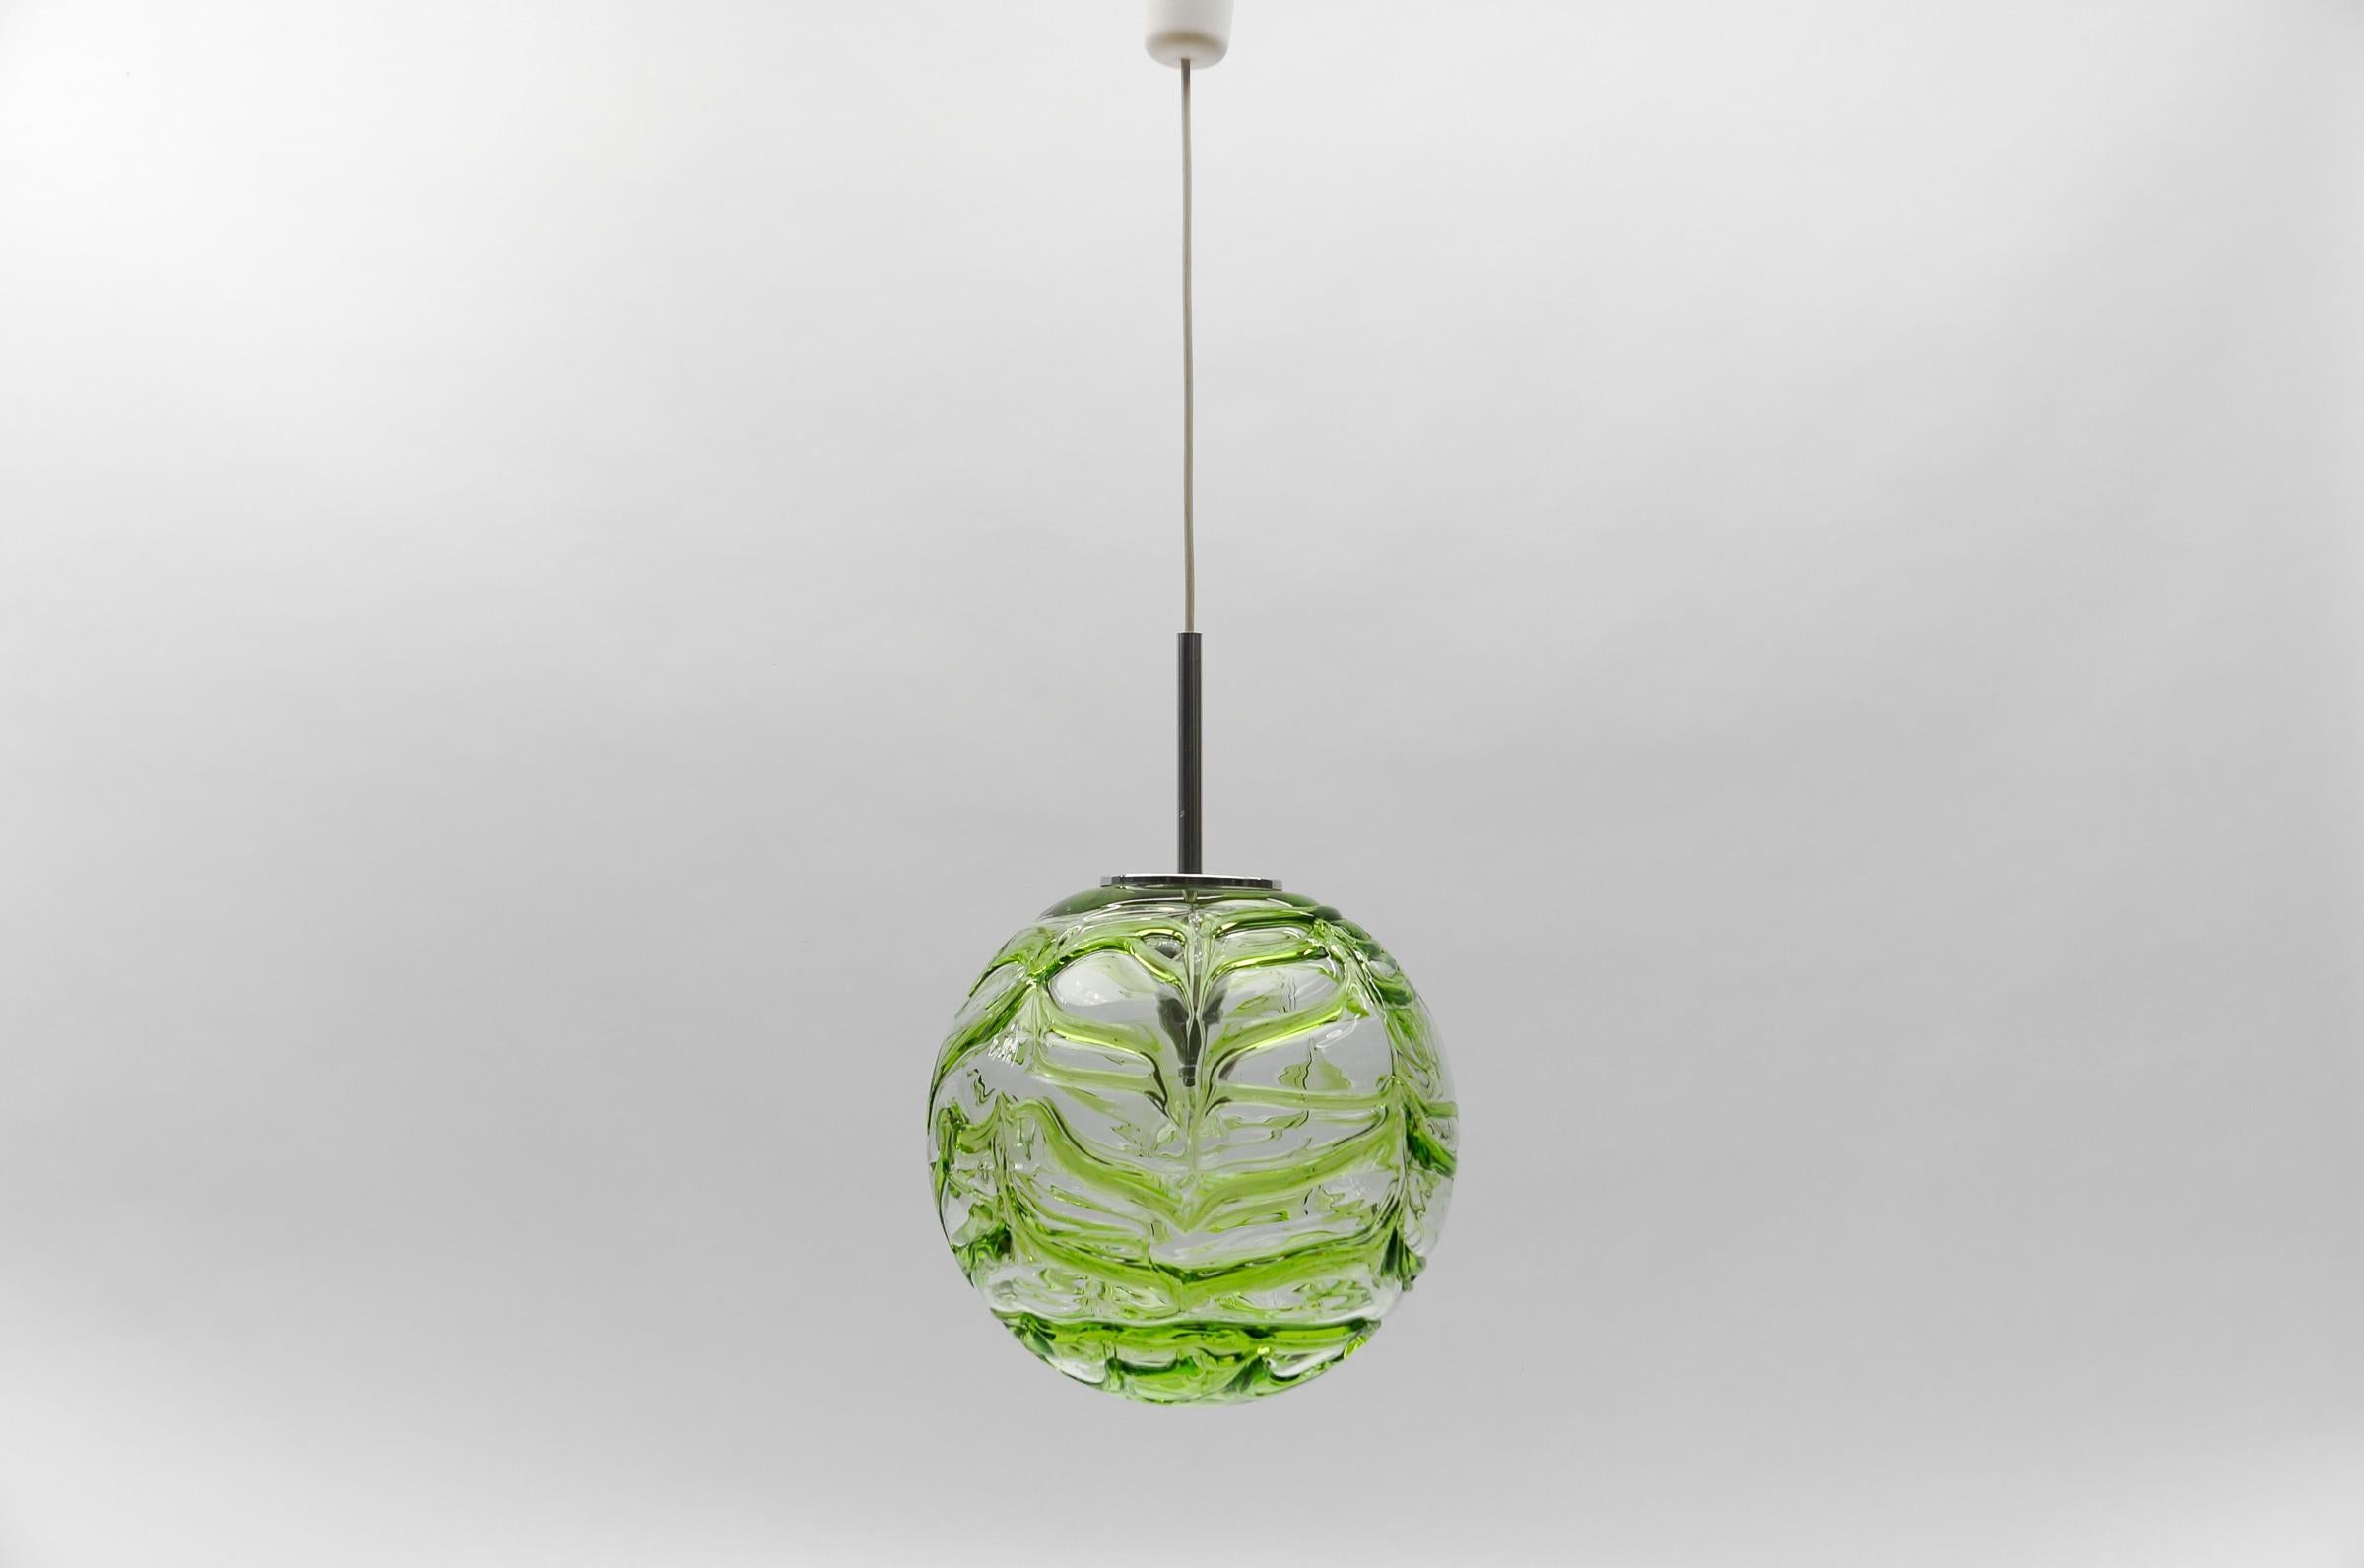 Large Green Murano Glass Ball Pendant Lamp by Doria, - 1960s Germany

One E27 socket. Works with 220V and 110V.

Our lamps are checked, cleaned and are suitable for use in the USA.